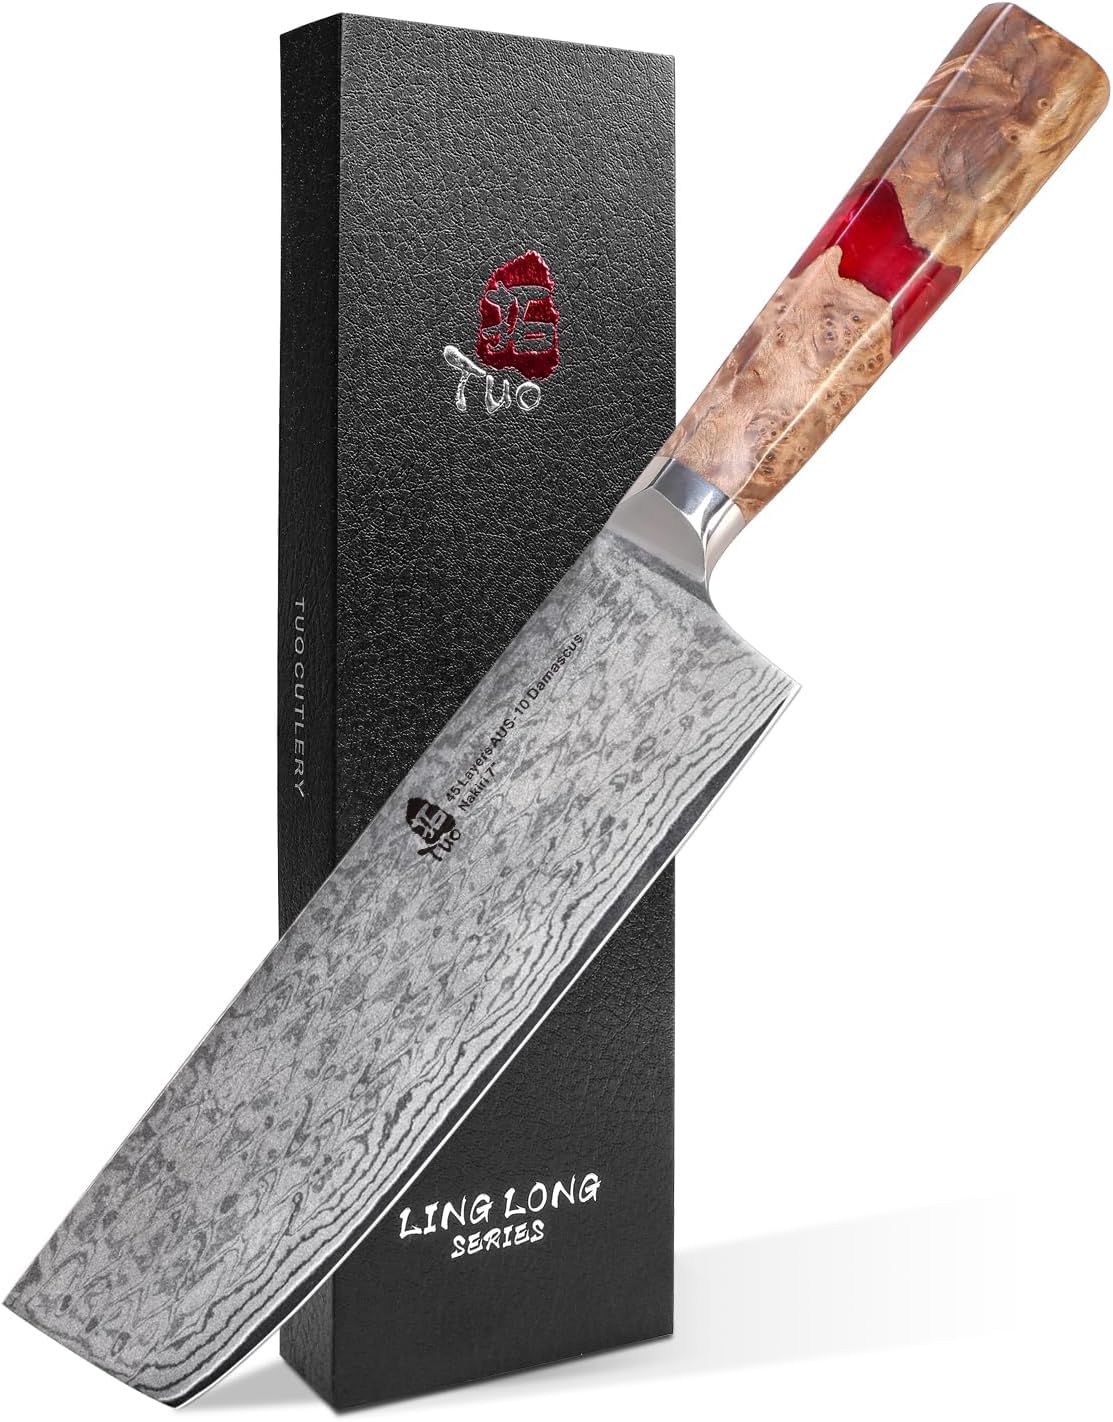 TUO Nakiri Knife 7 inch Japanese Kitchen Knife Nakiri Chef Knife 45-layers AUS-10 Damascus Steel Vegetable Knife Hand Forged Resin Handle with Gift Box